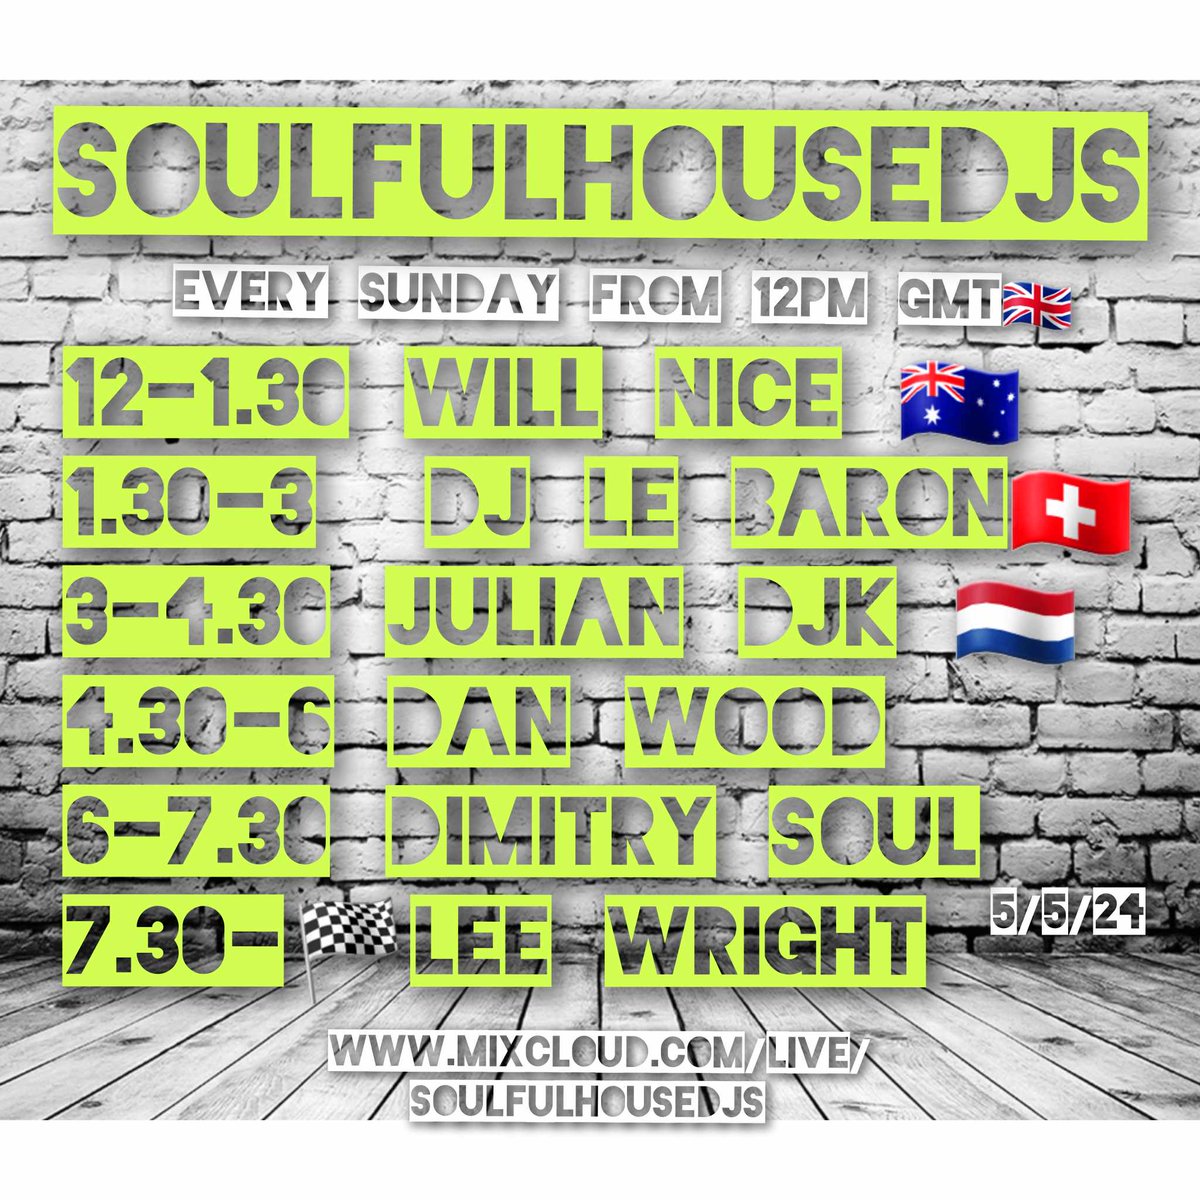 Brining the Bank Holiday 🔥 all day today!

Get us on: mixcloud.com/live/soulfulho…

See you in the chat🗣

#soulfulhouse #housemusic #house #housemusicalllifelong